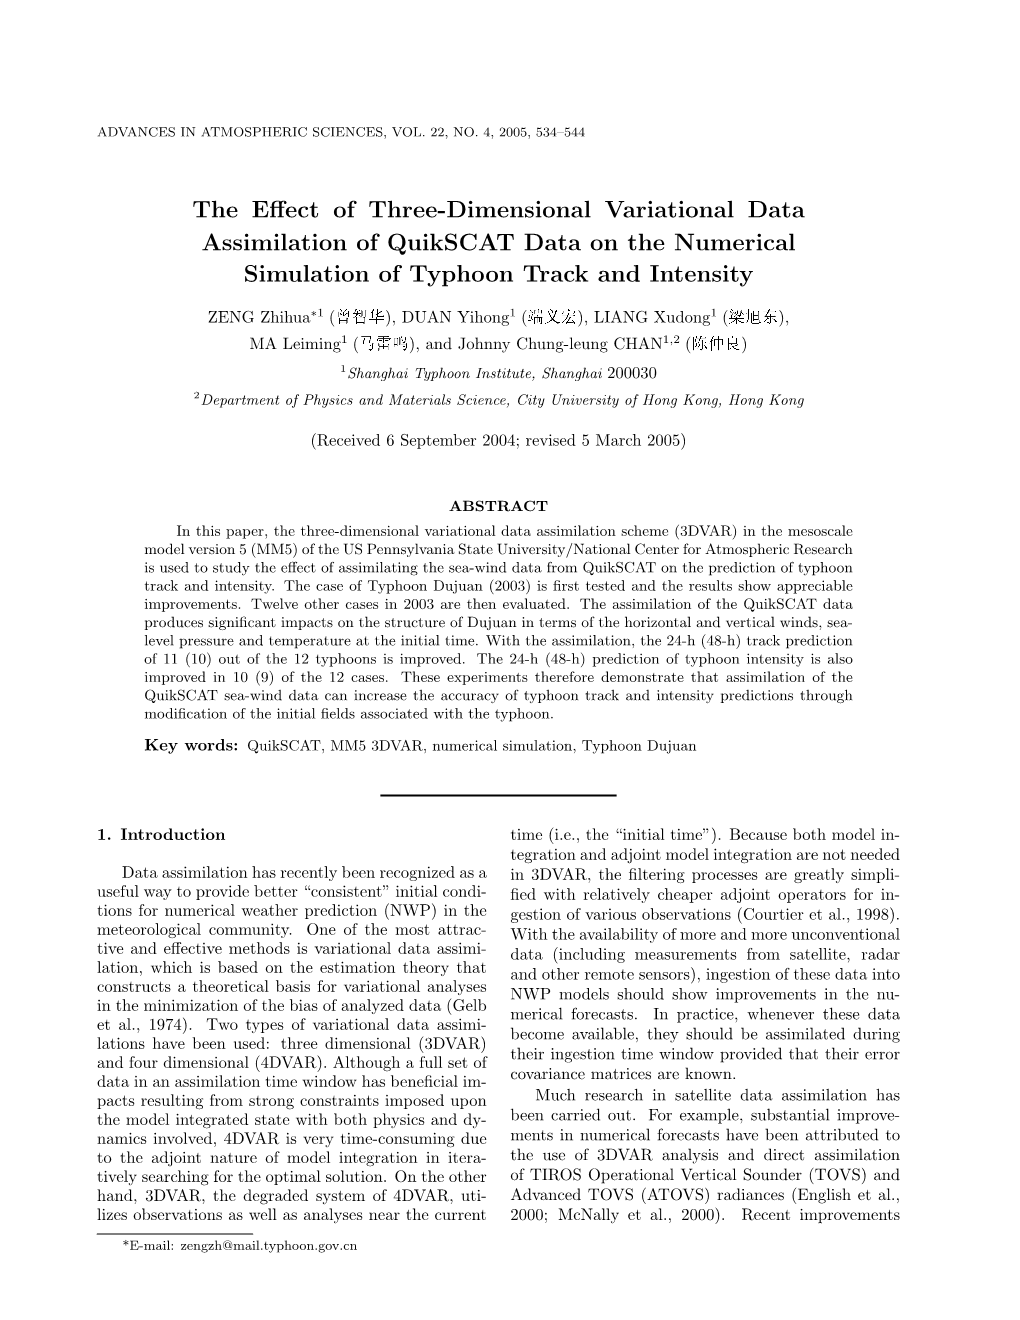 The Effect of Three-Dimensional Variational Data Assimilation Of